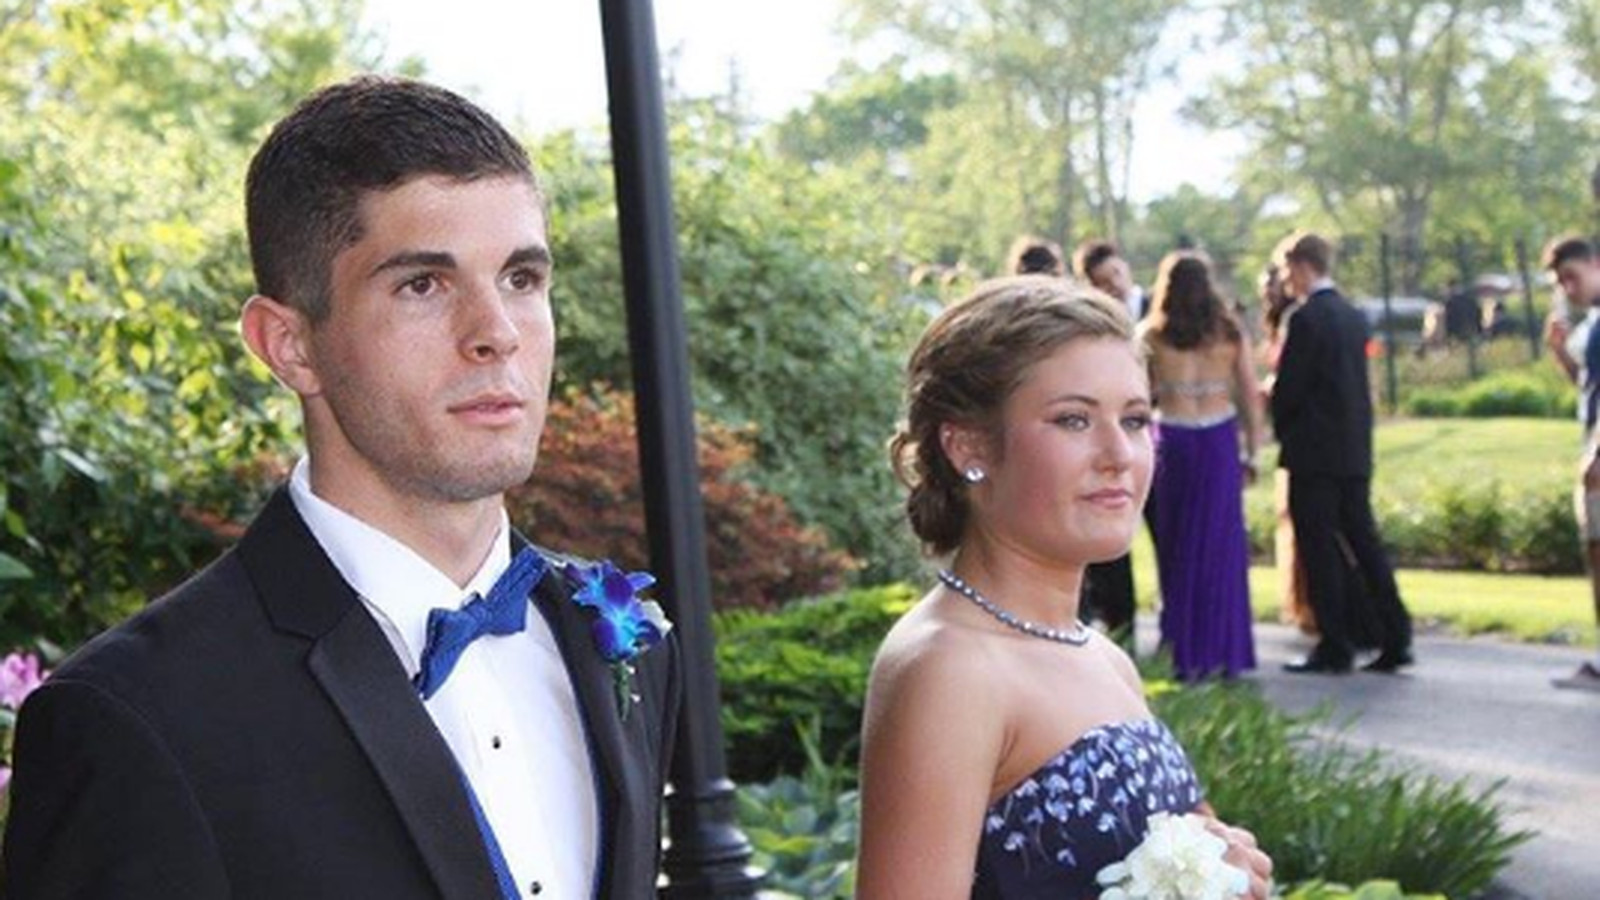 Christian Pulisic attended high school prom hours before scoring first